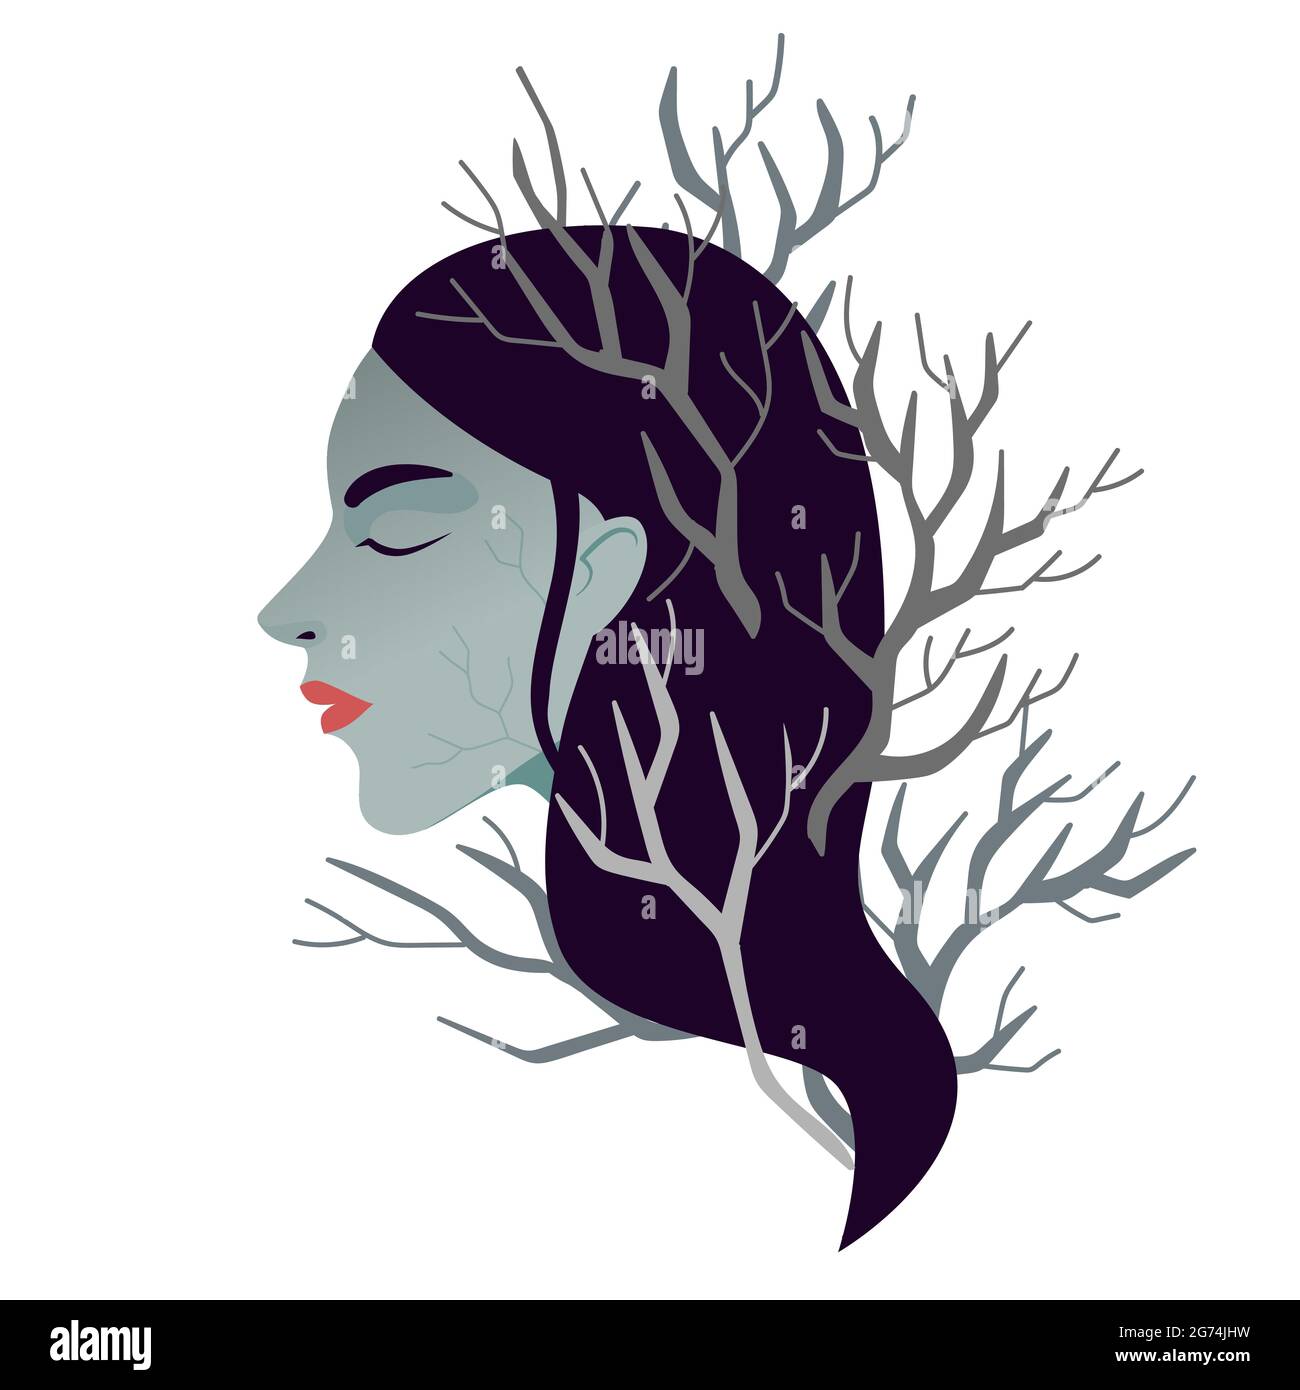 Woman burnout. Female in depression and destructive mental health. Unresourceful state of minde and lack of energy. Woman with dry branches her hair. Stock Vector